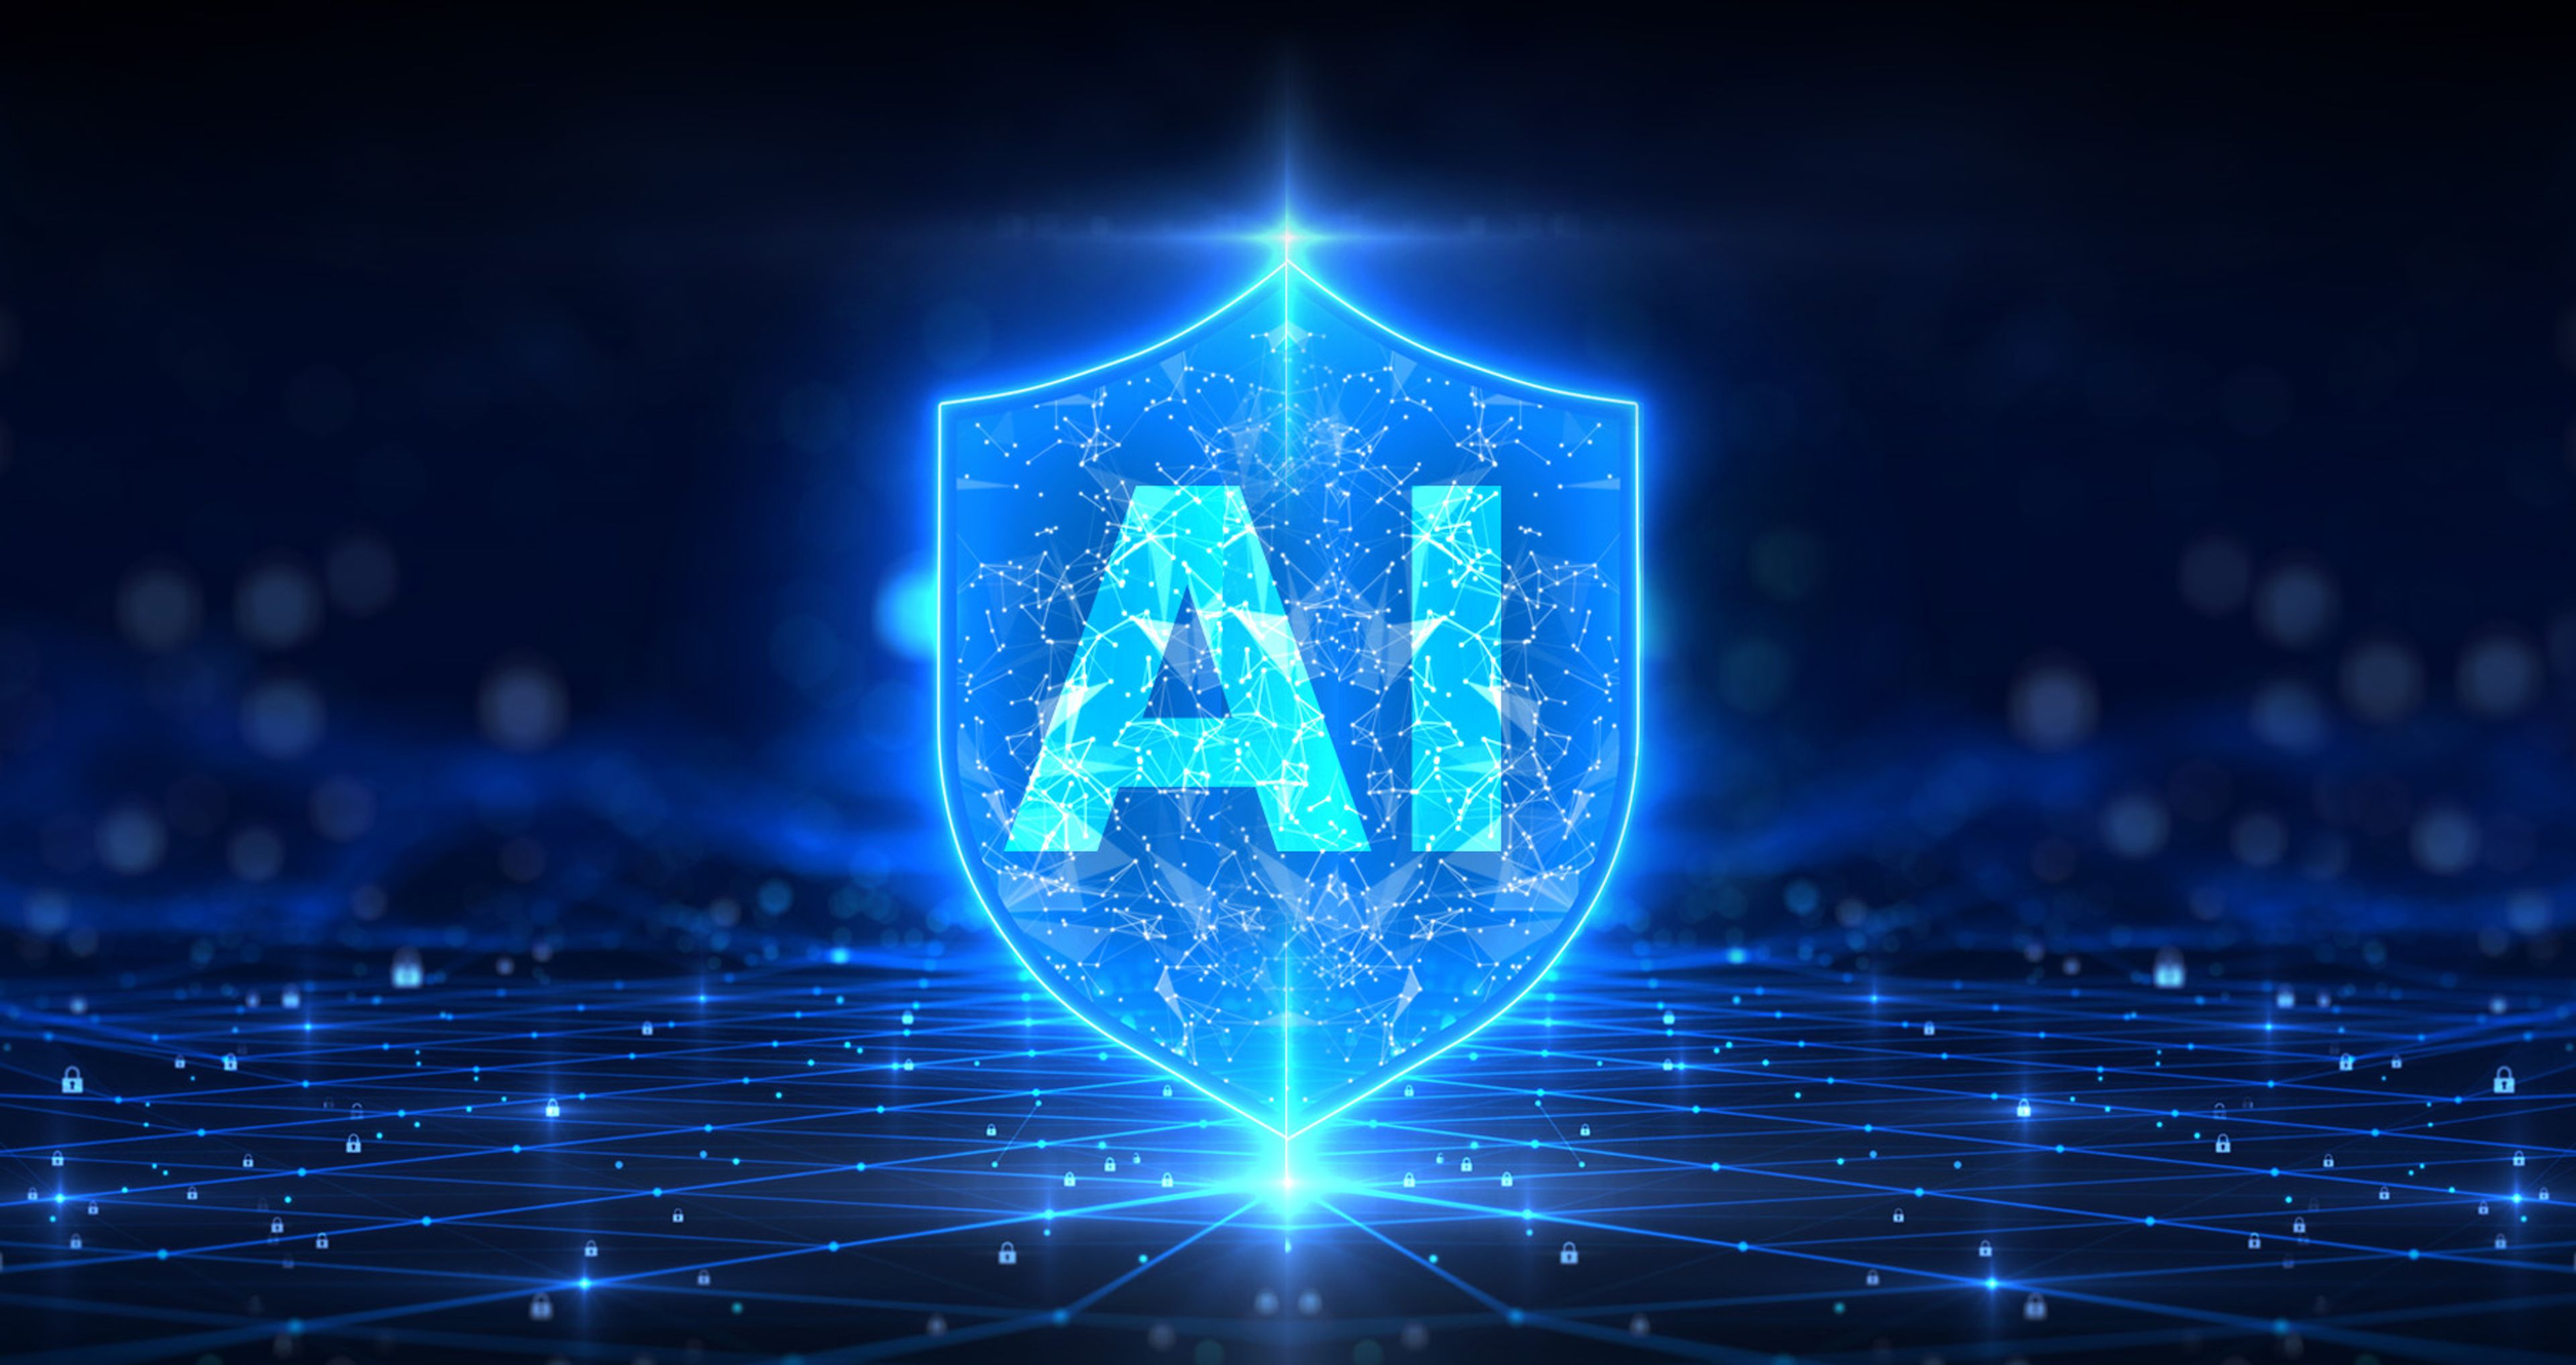 An illustration of a digital cybersecurity shield with connected lines shooting out from its center, with the letters "AI" within the shield.